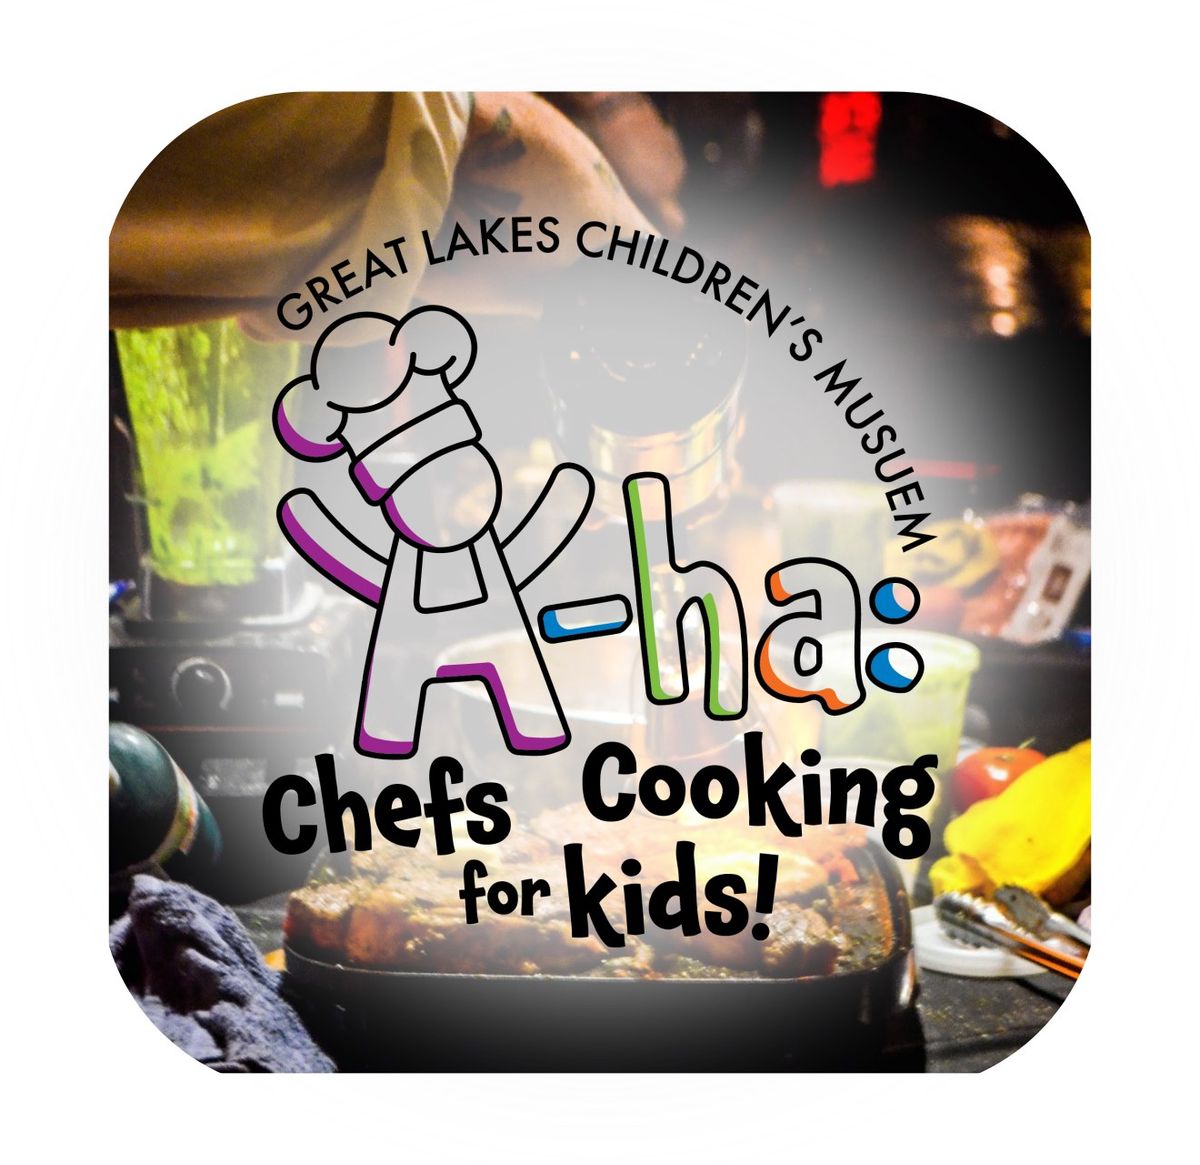 A-HA: Chefs Cooking for Kids